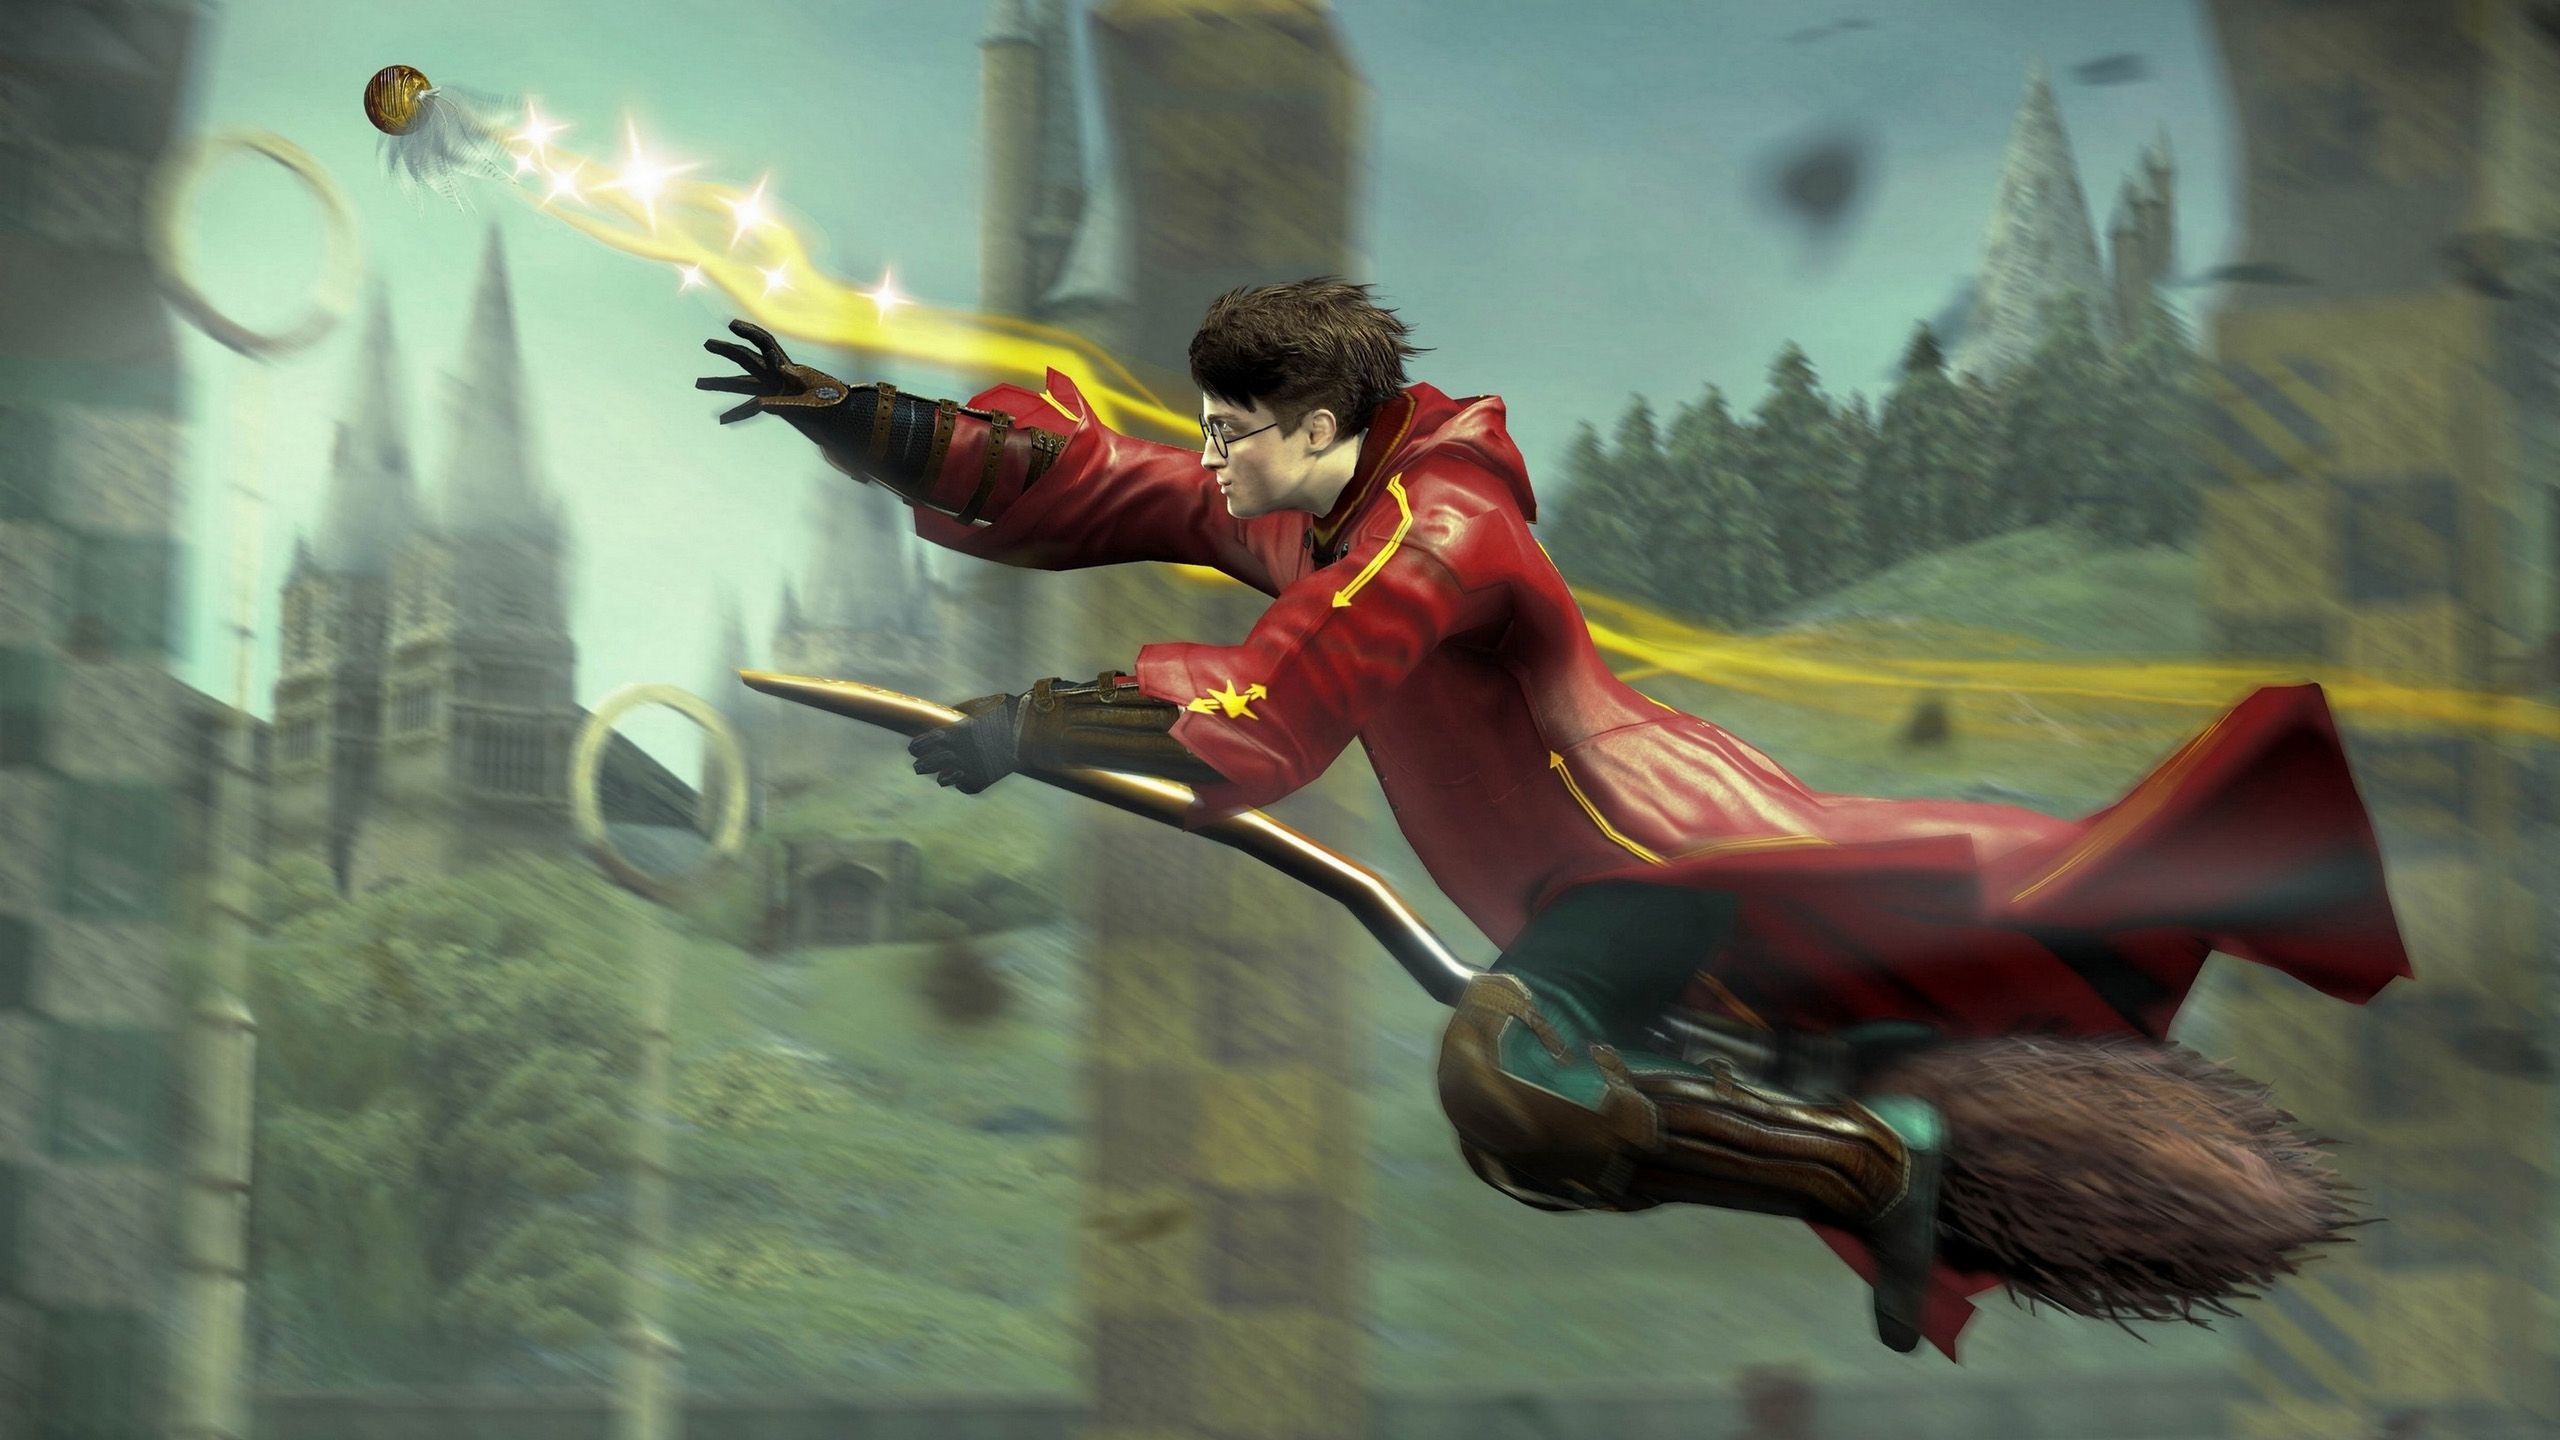 quidditch Harry-potter-Iphone-Wallpaper | Harry potter wallpaper, Harry  potter iphone wallpaper, Harry potter iphone